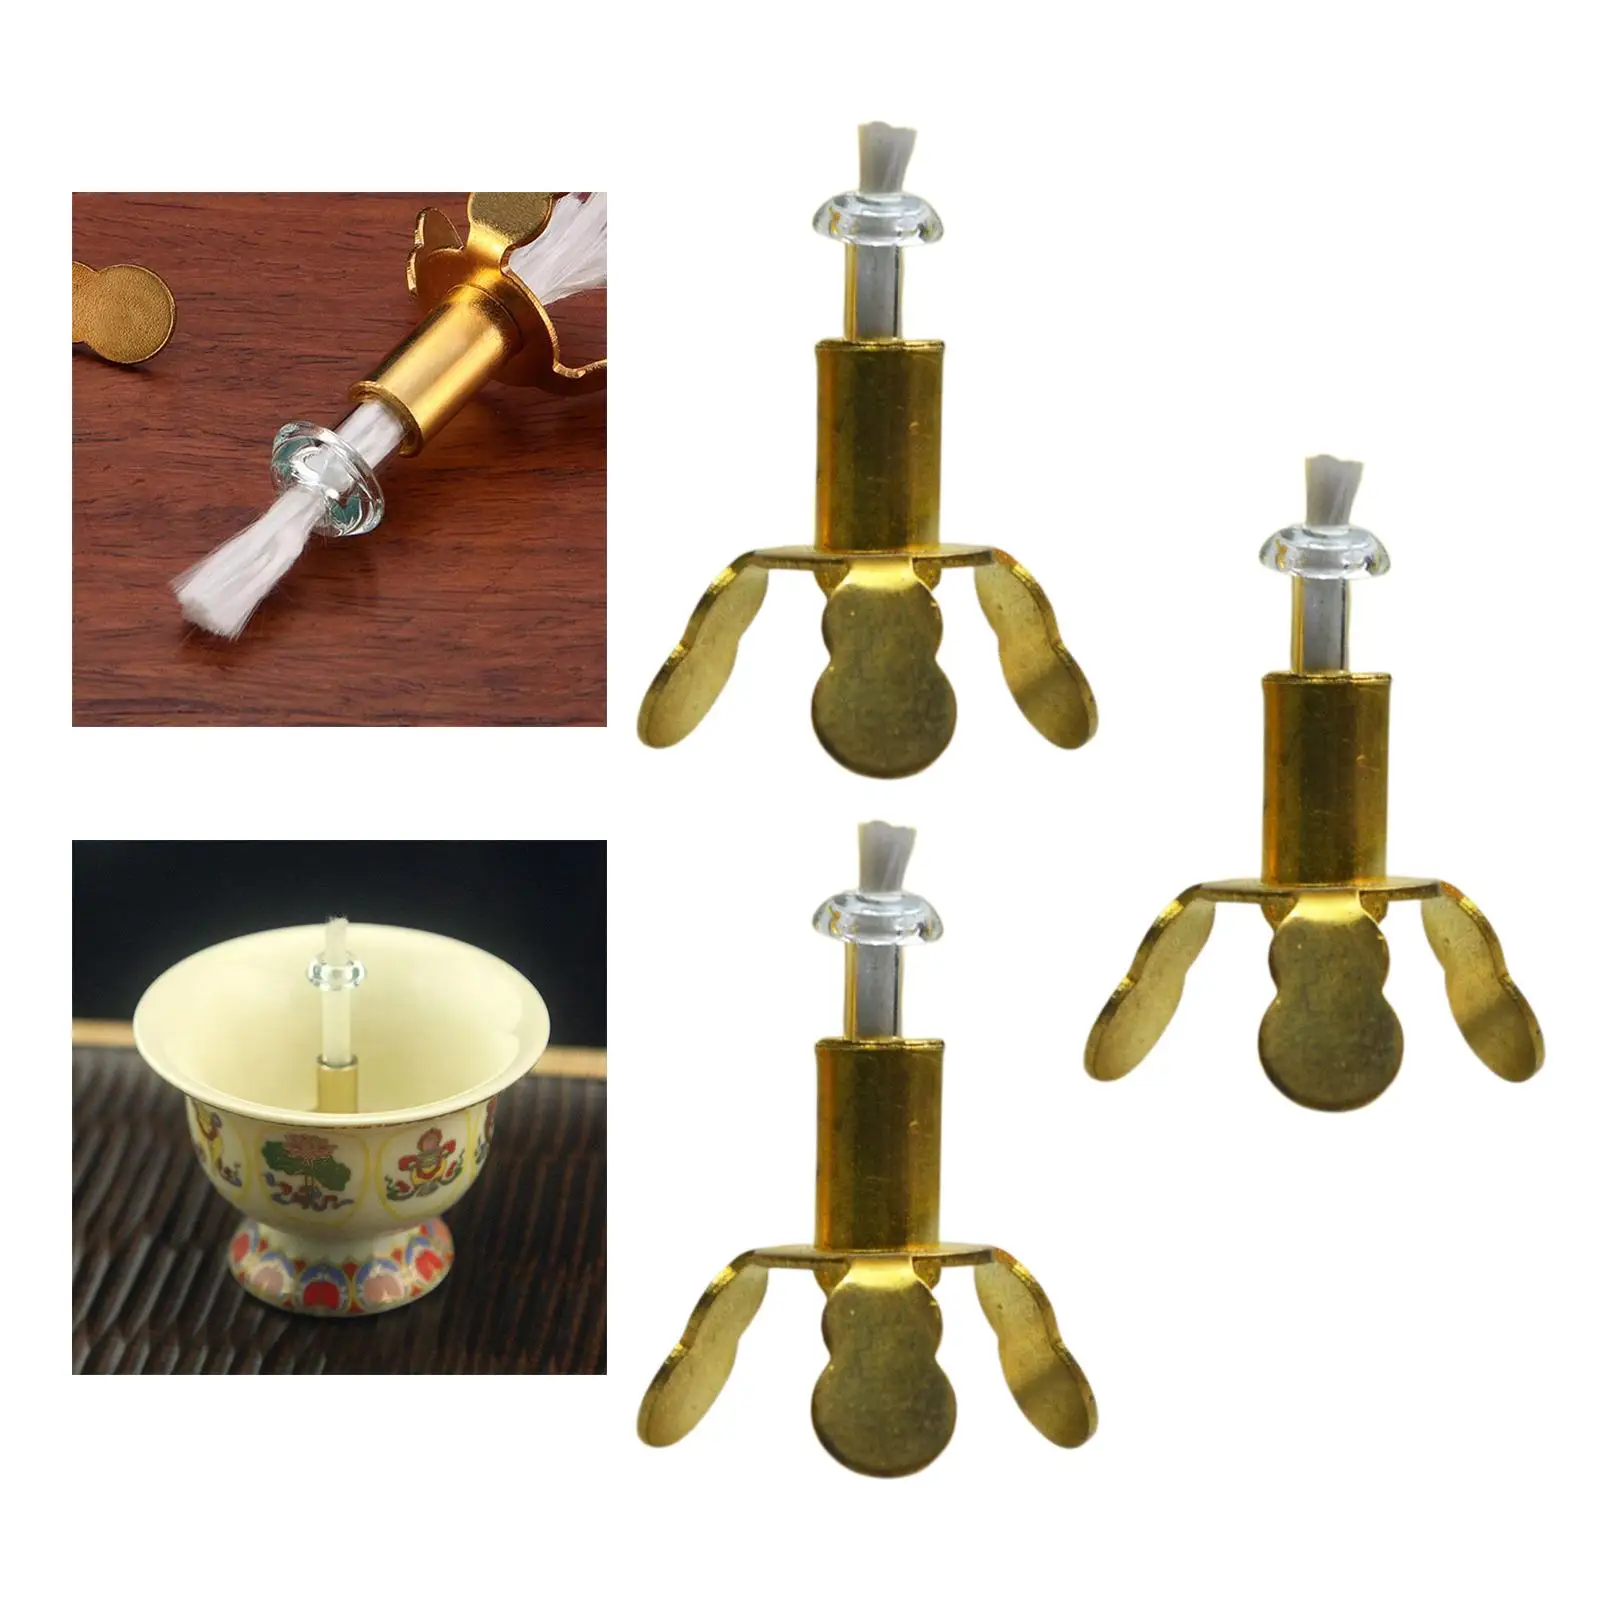 3Pcs Oil Lamp Wick Holder Copper Alloy Stand Shelf with Wicks for Homemade Proposal Wedding DIY Oil Lamp Long Light Accessories